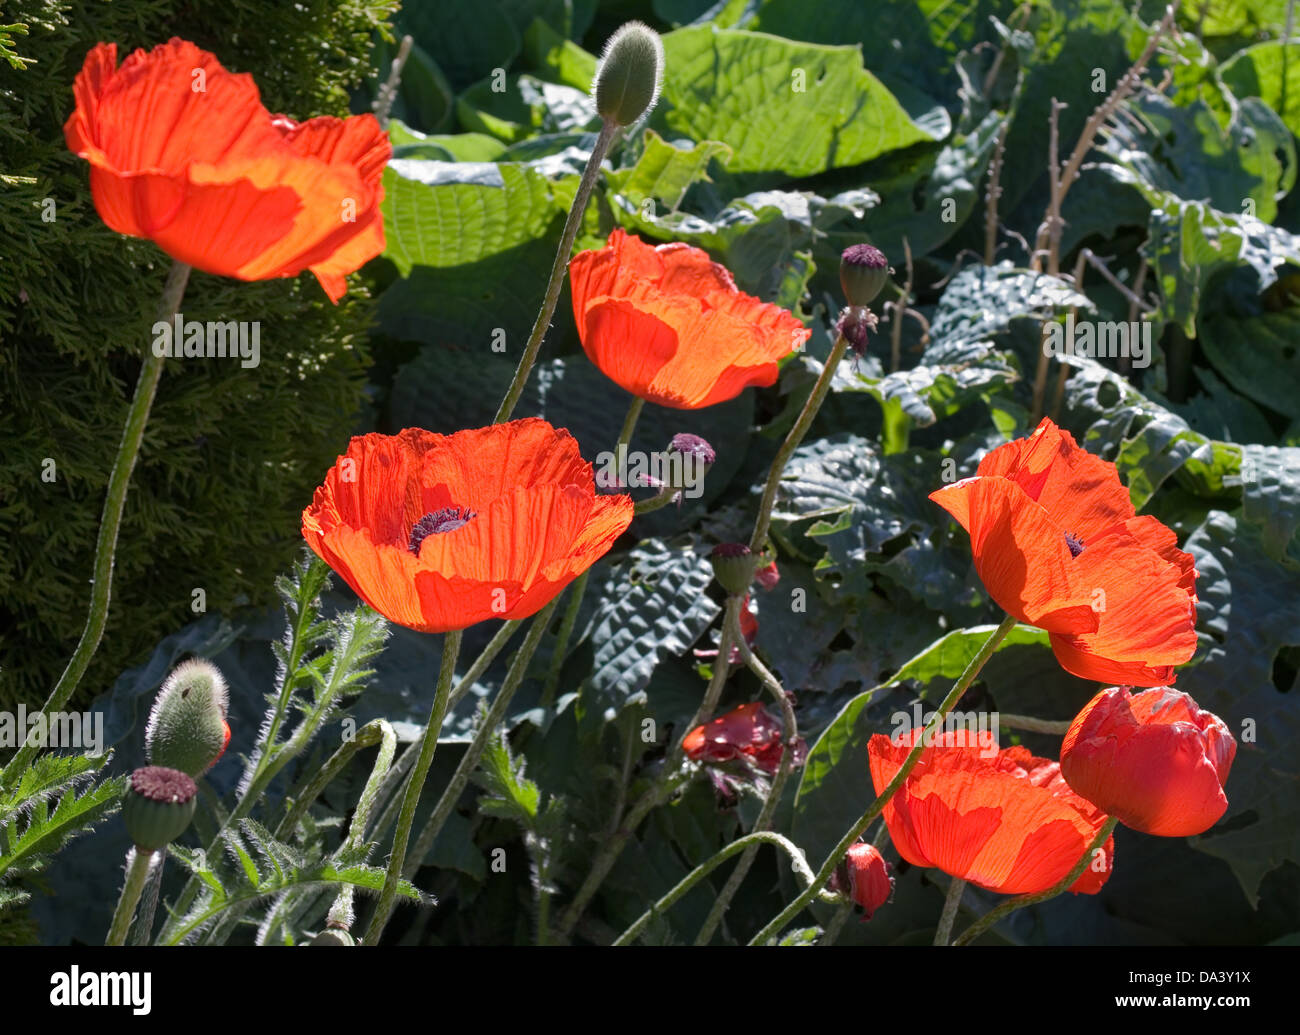 Bright red oriental poppies in flower in garden herbaceous border, backlit in sunshine,early summer, Cumbria, England UK Stock Photo